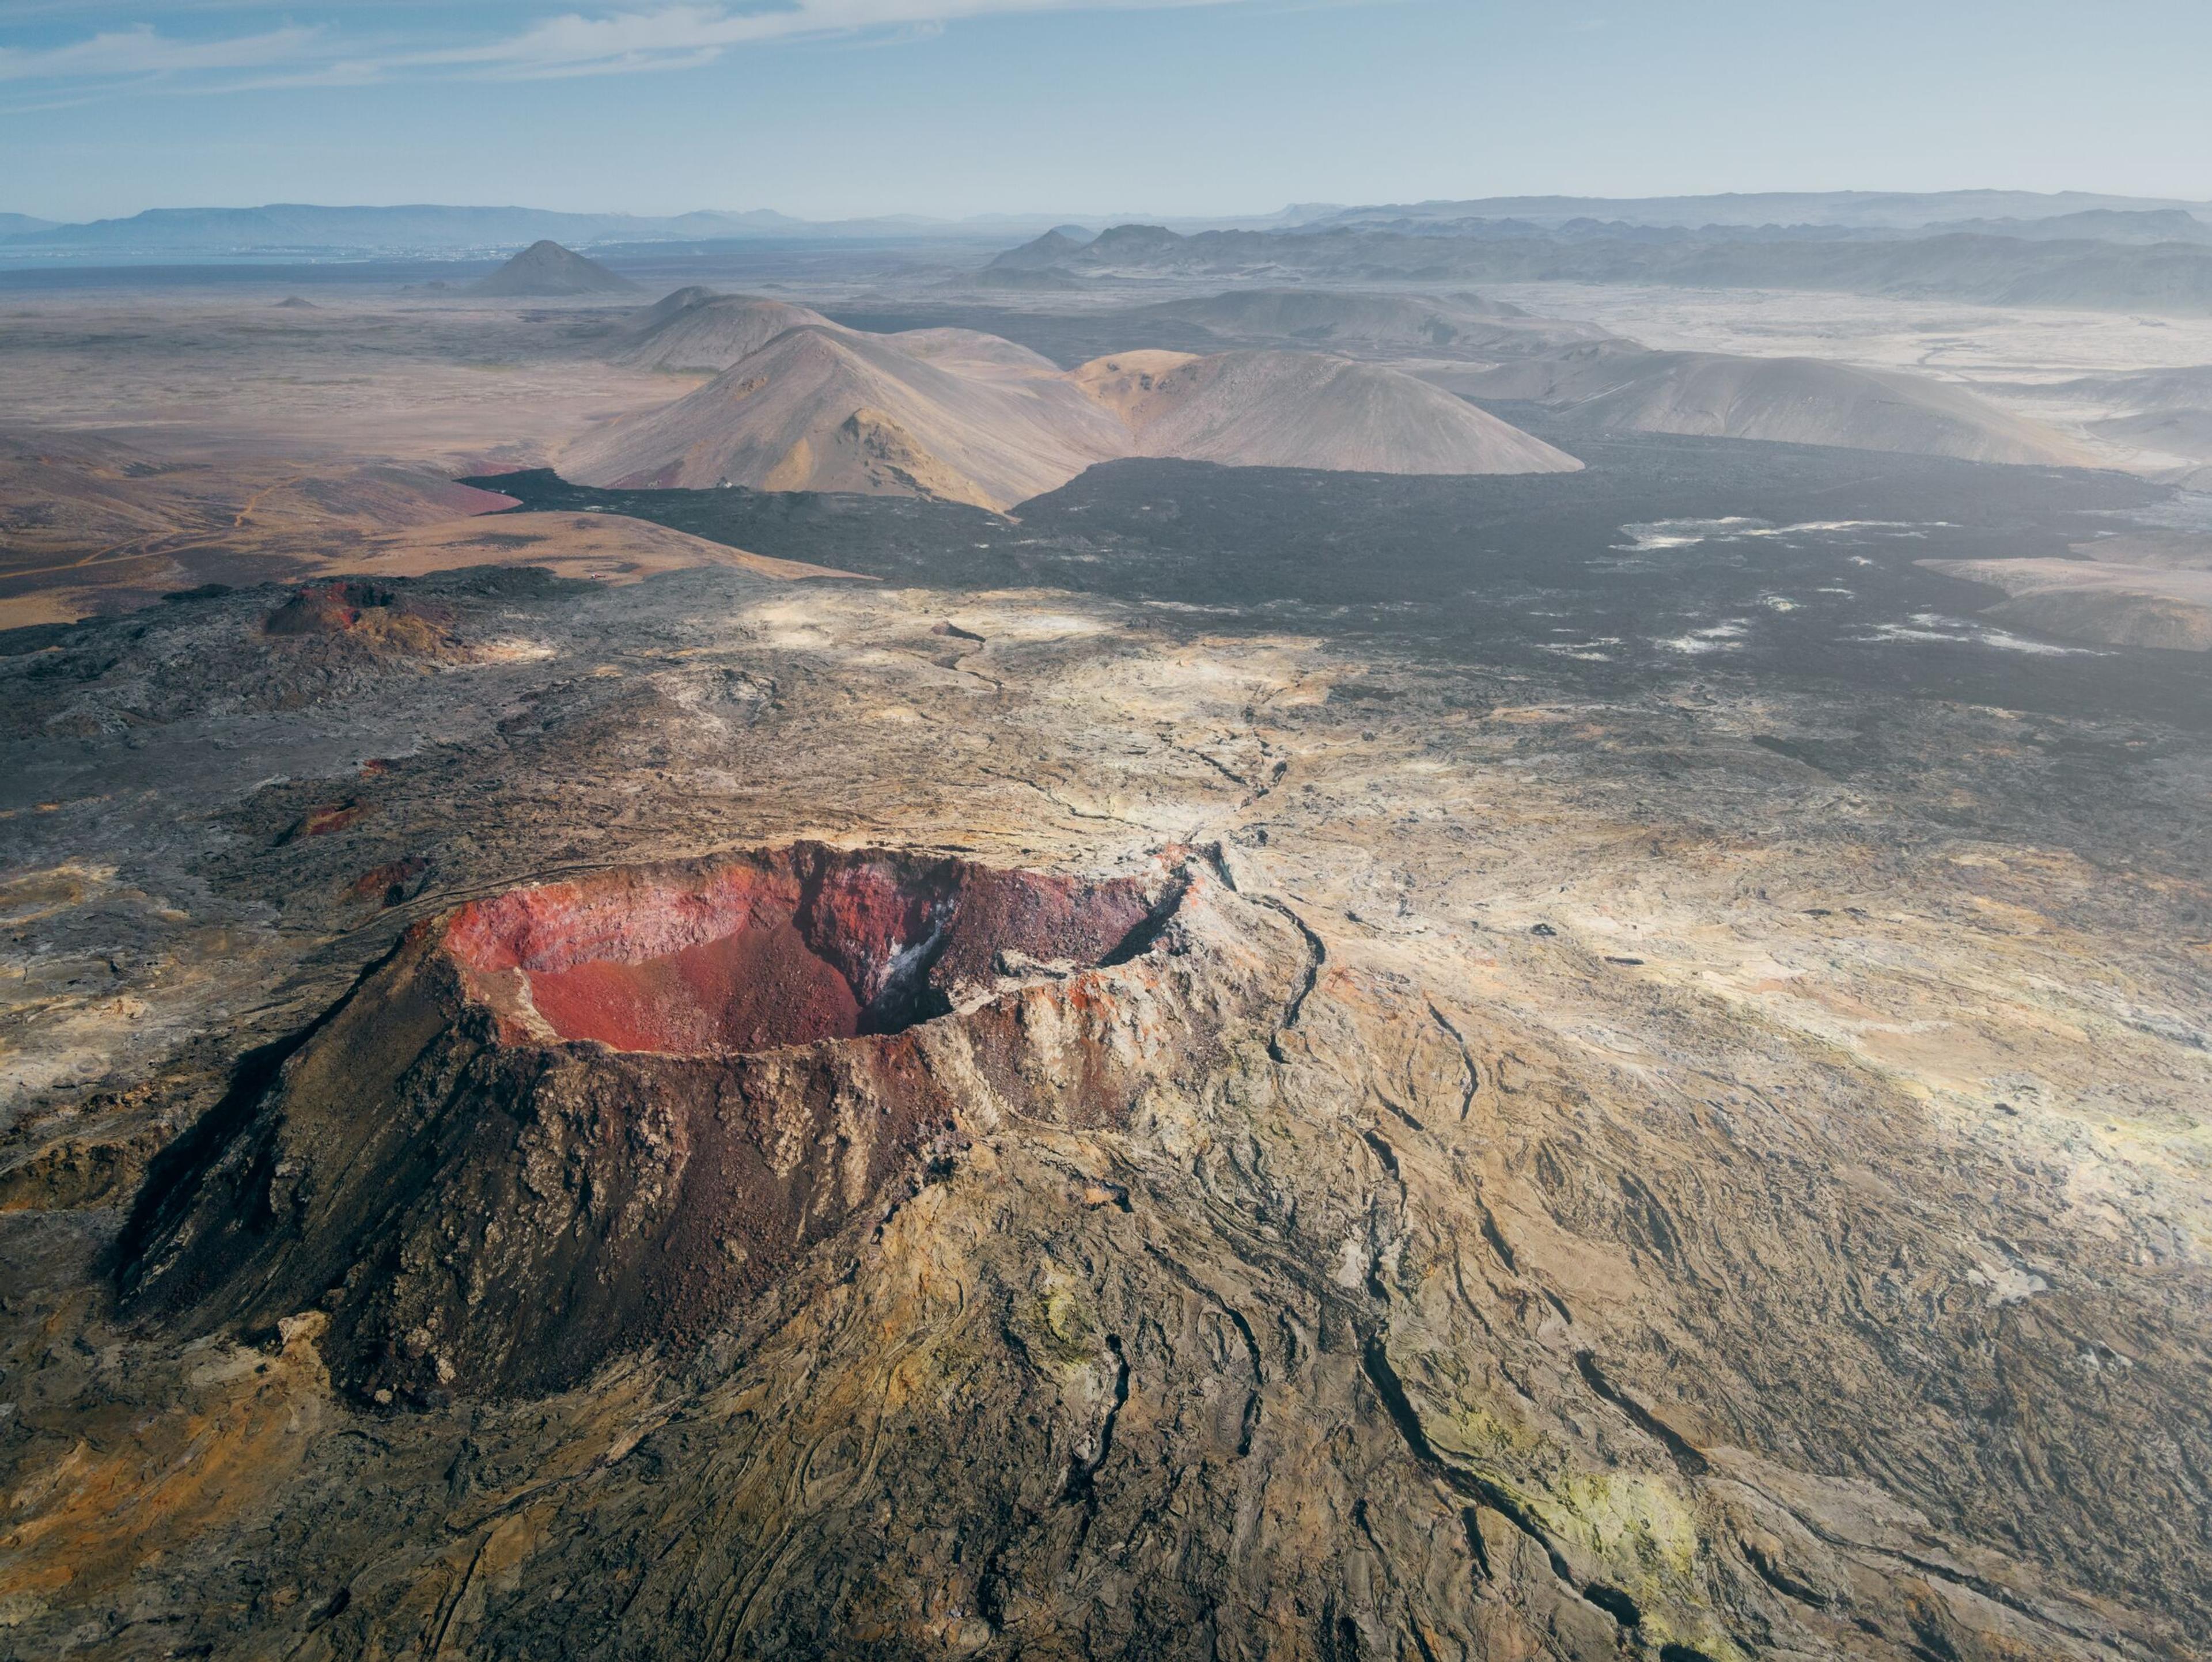 Aerial view of a vast, barren landscape with a striking volcanic crater, surrounded by rugged terrain and distant mountains.